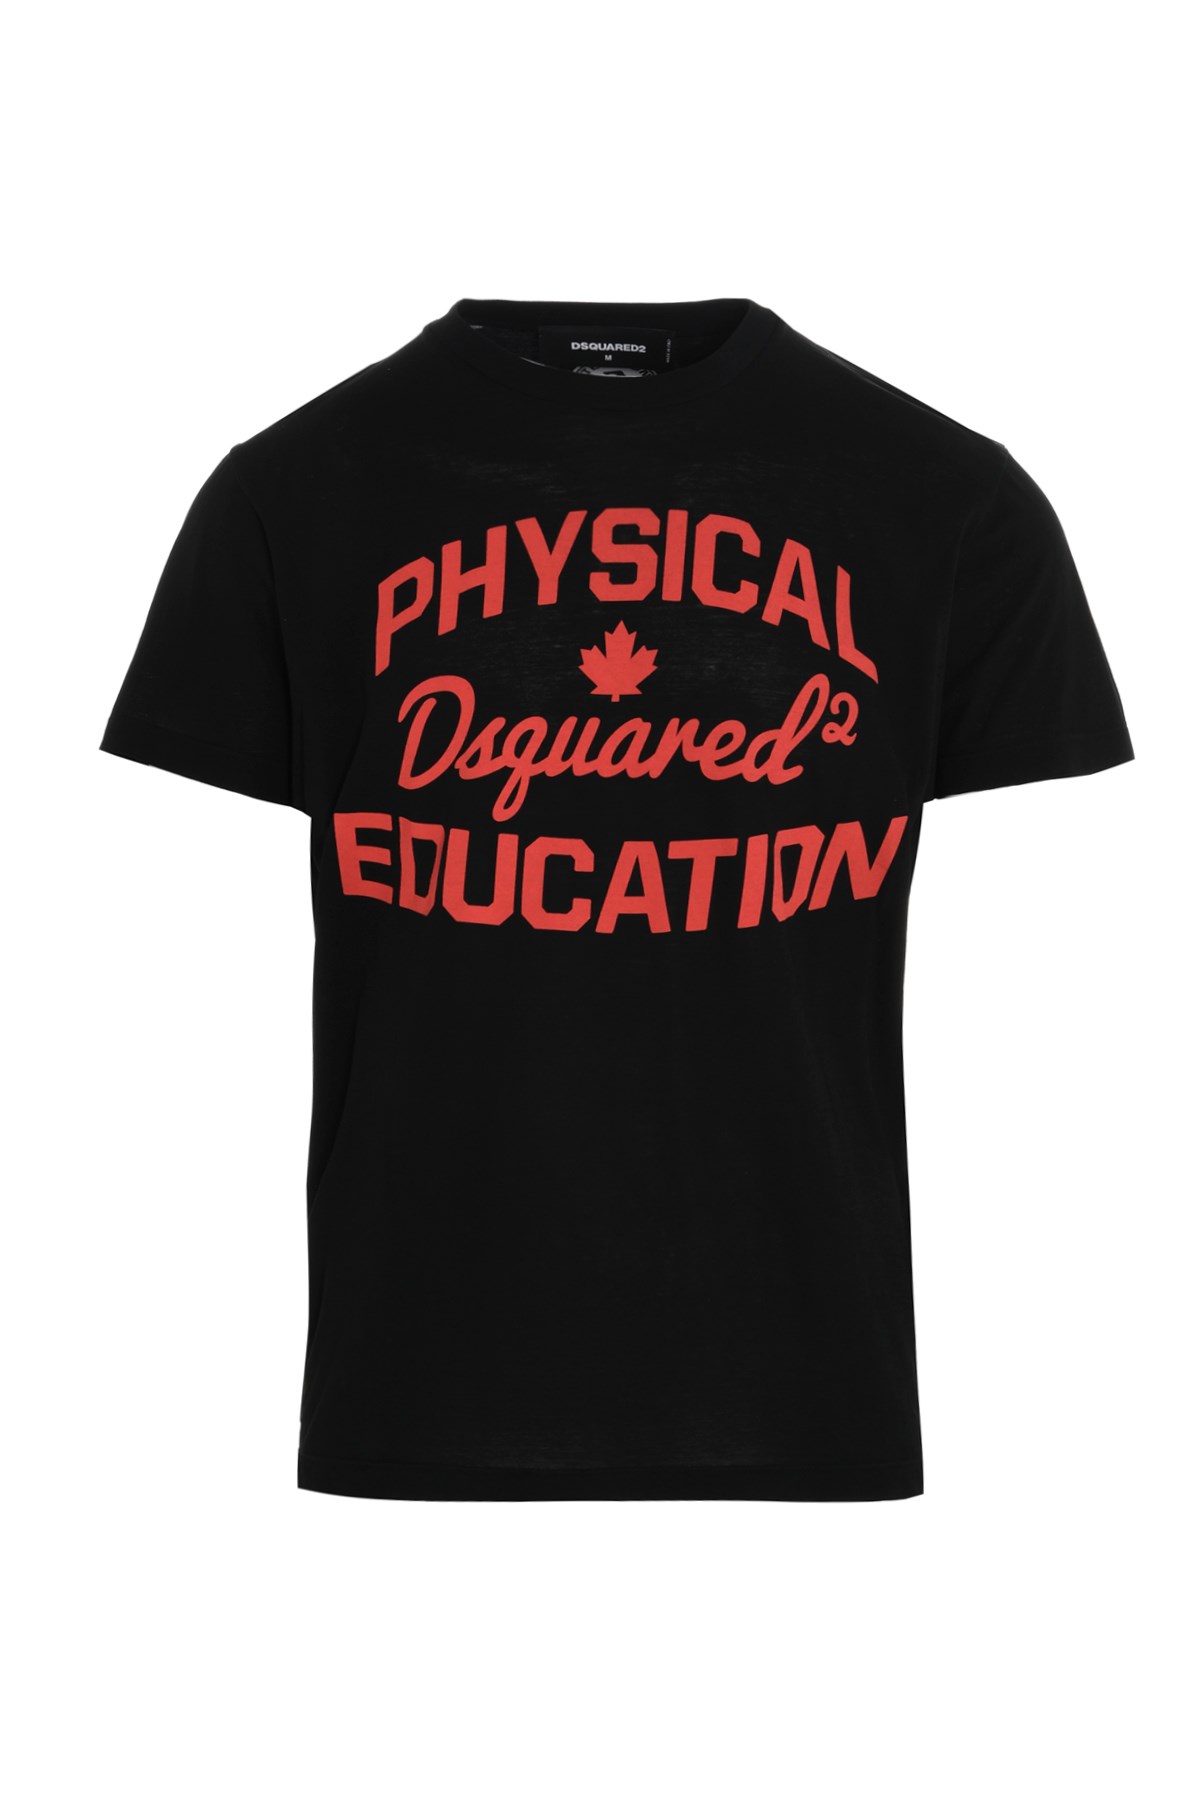 DSQUARED2 'Physical Education' T-Shirt